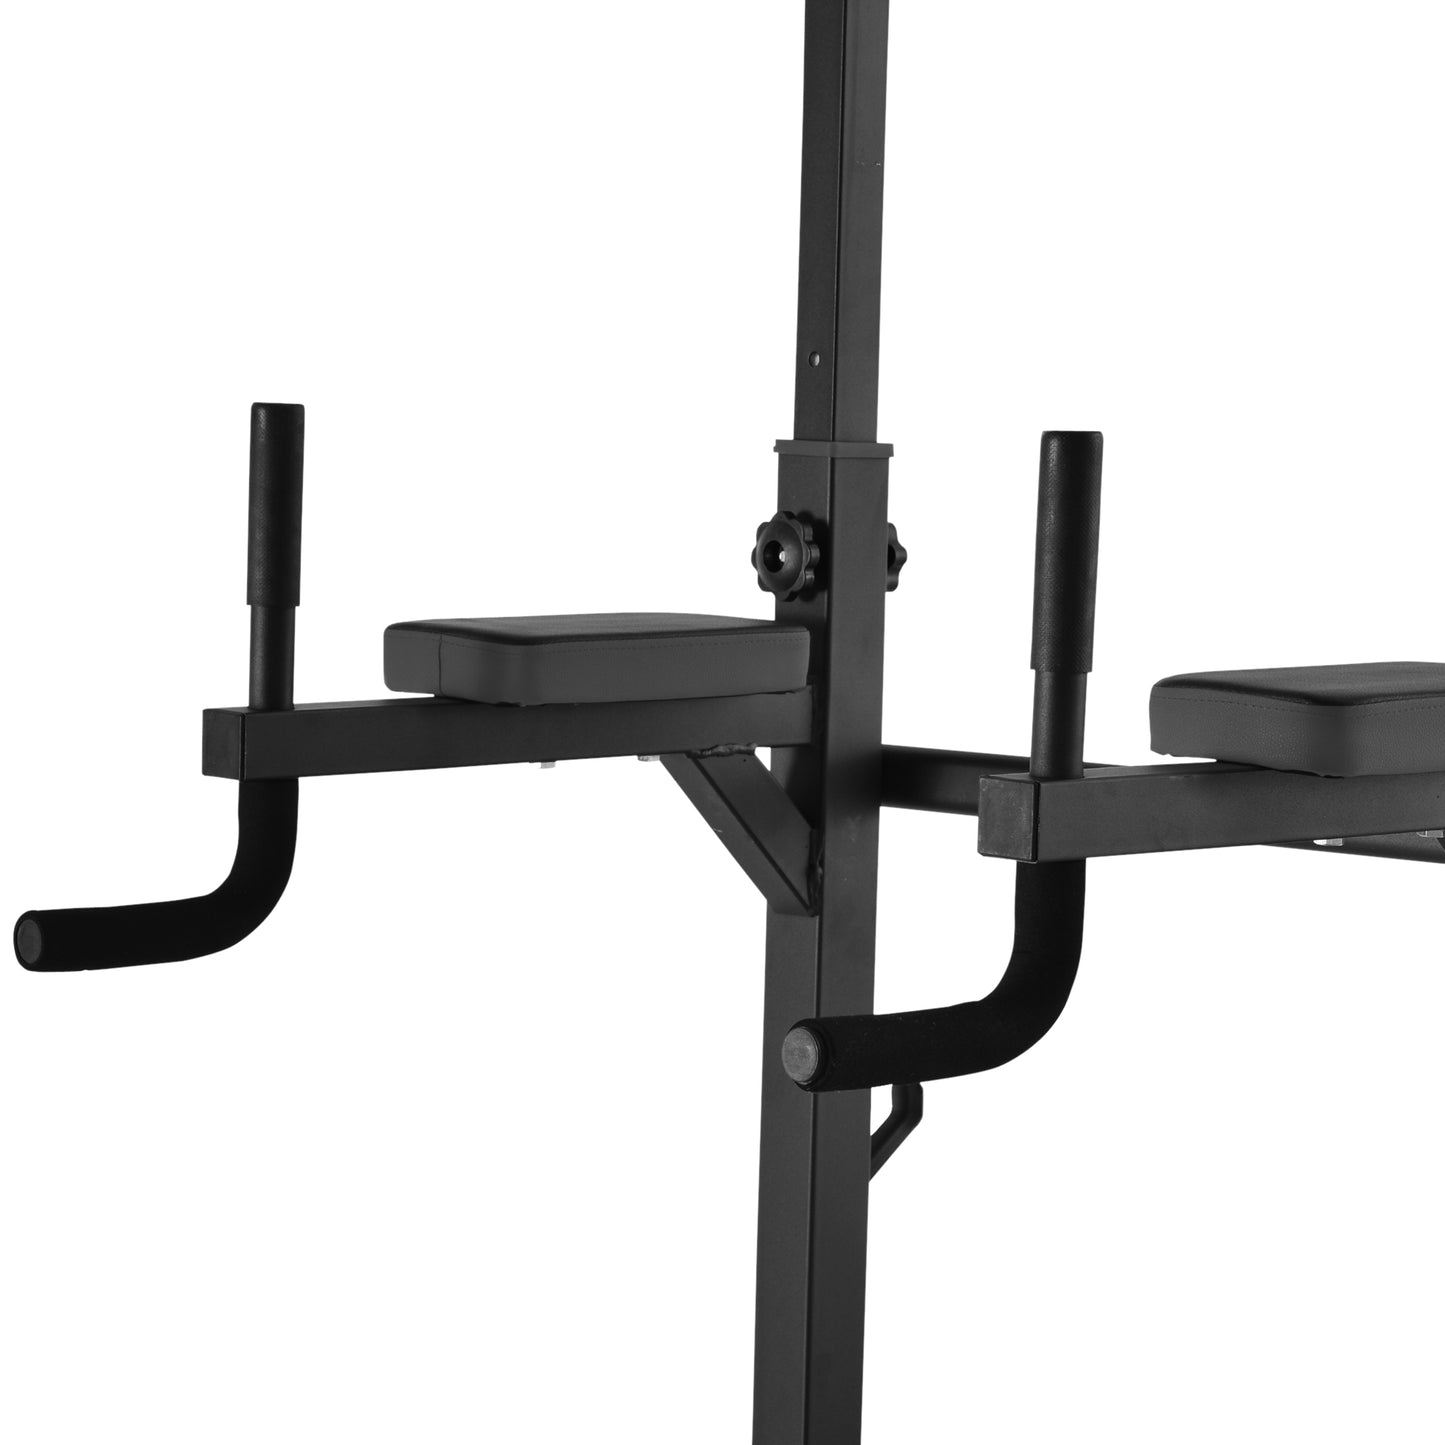 HOMCOM Adjustable&Folded Dip Stands Multi-Function Pull-ups Sit-ups, Fitness tools Gym Home